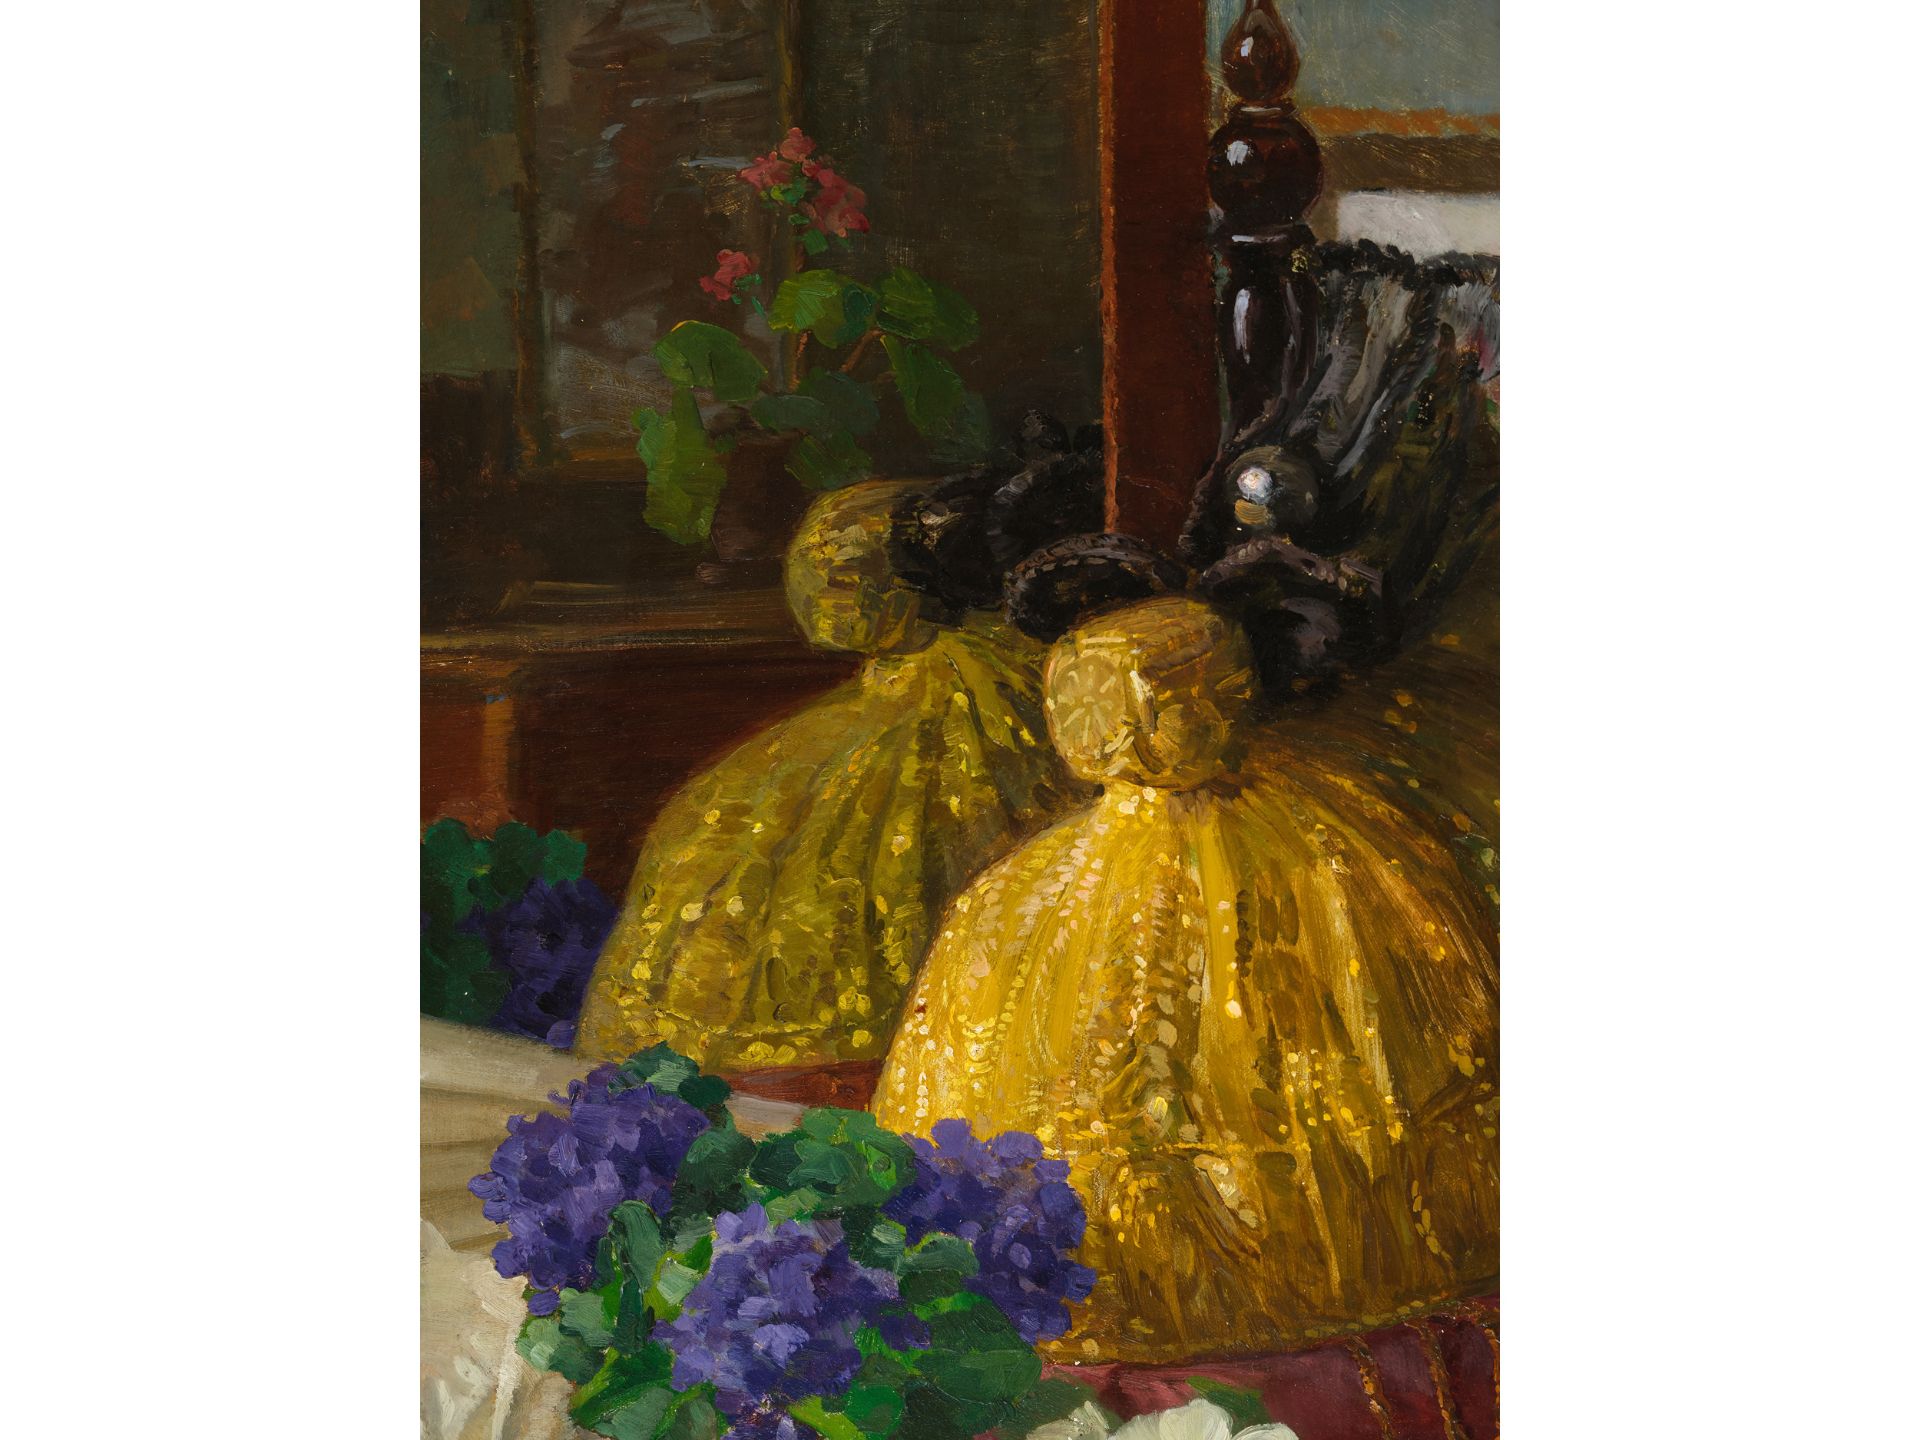 Liesl Kinzel, Vienna 1886 - 1961 Spitz at the Danube, Still life with gold hood - Image 3 of 5